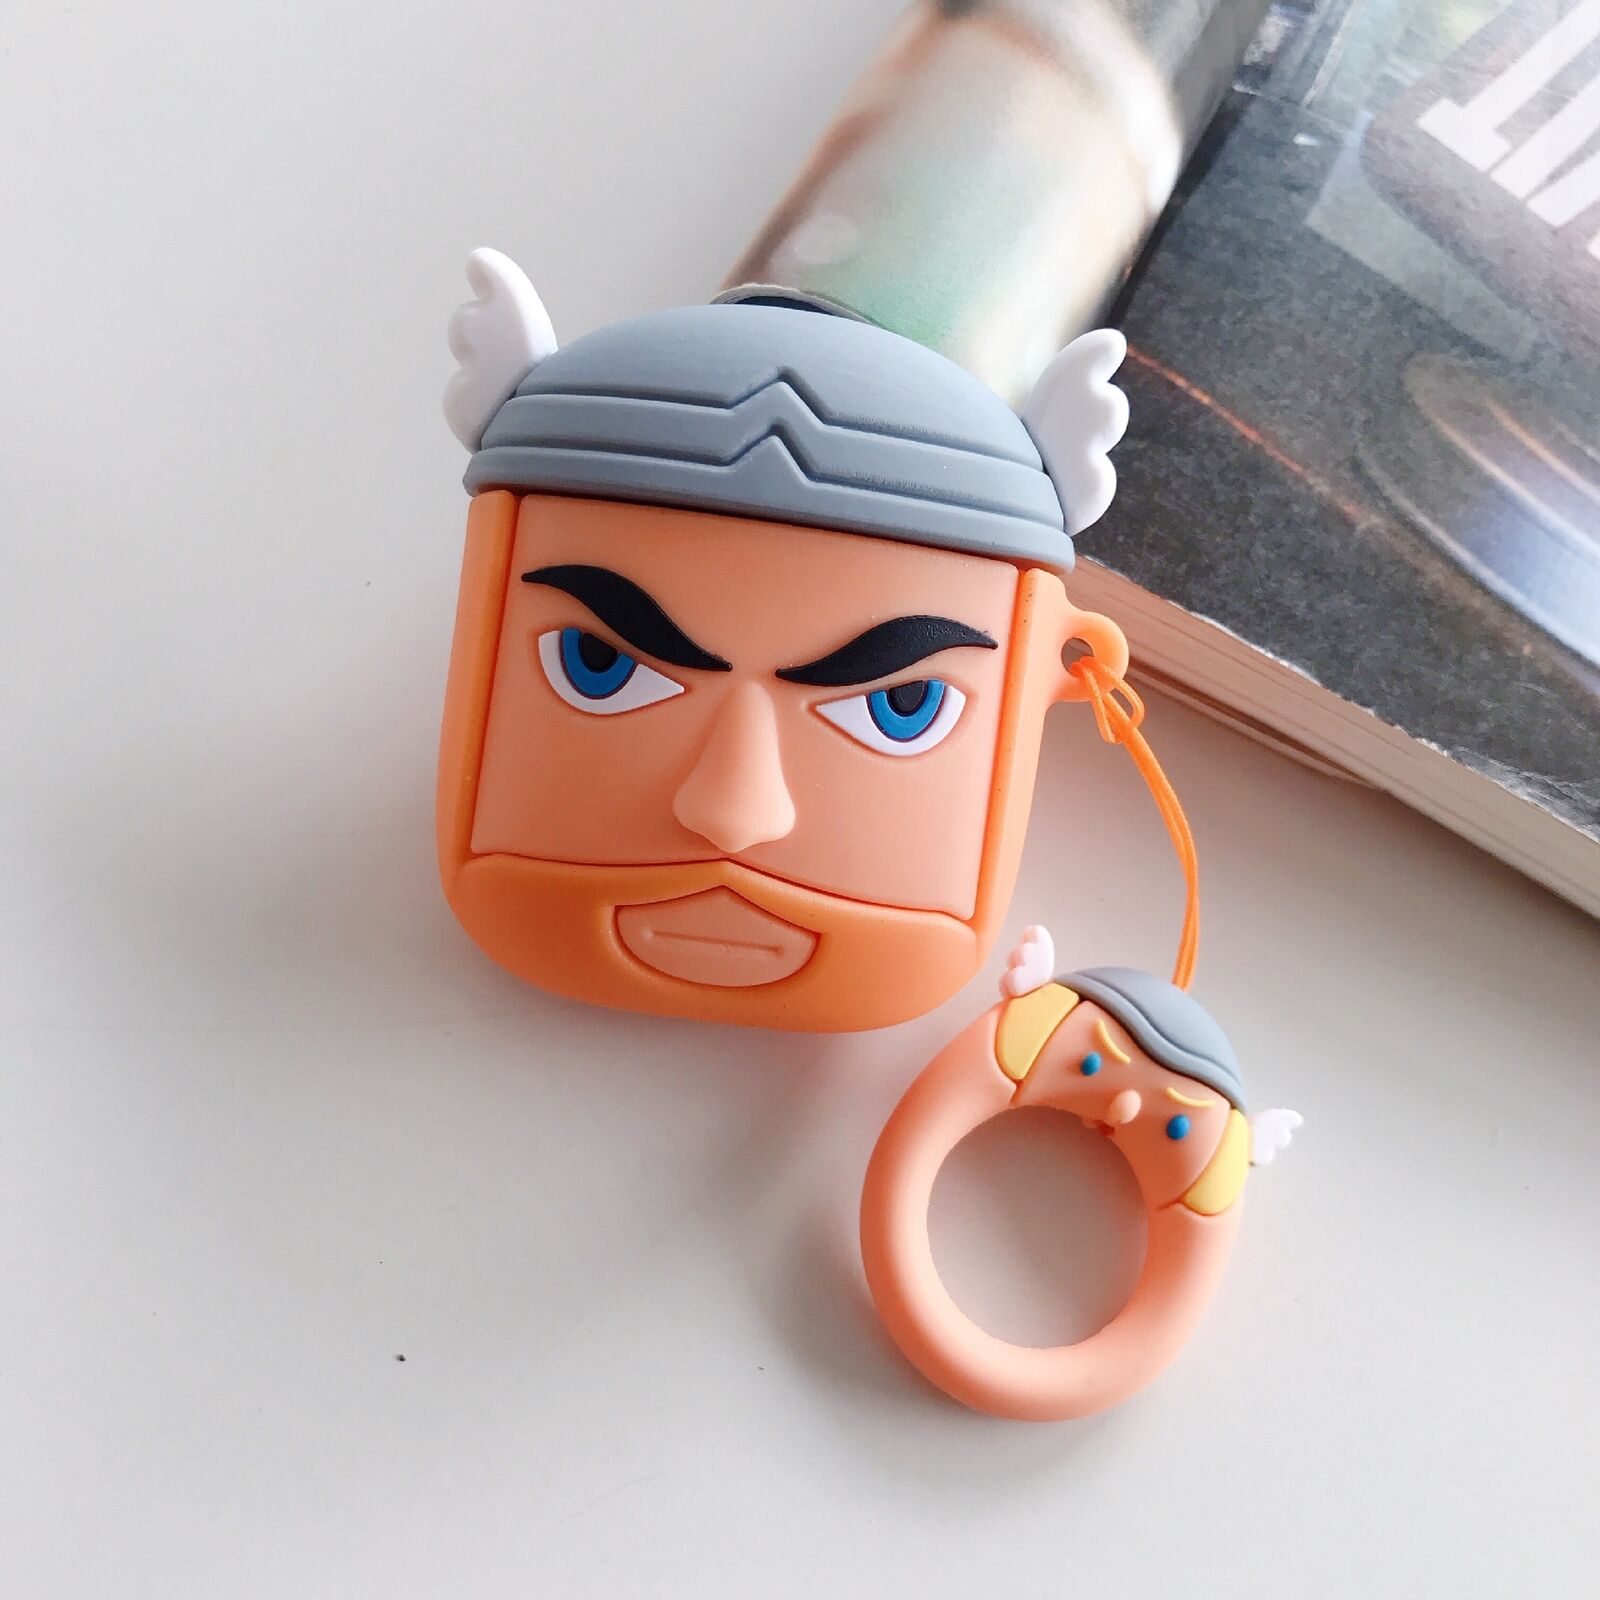 Cute Super Hero Cartoon Silicone Airpods Case Cover Skin For Apple Airpods 1/2 Airpods Case AtlasCase Thor + Ring 